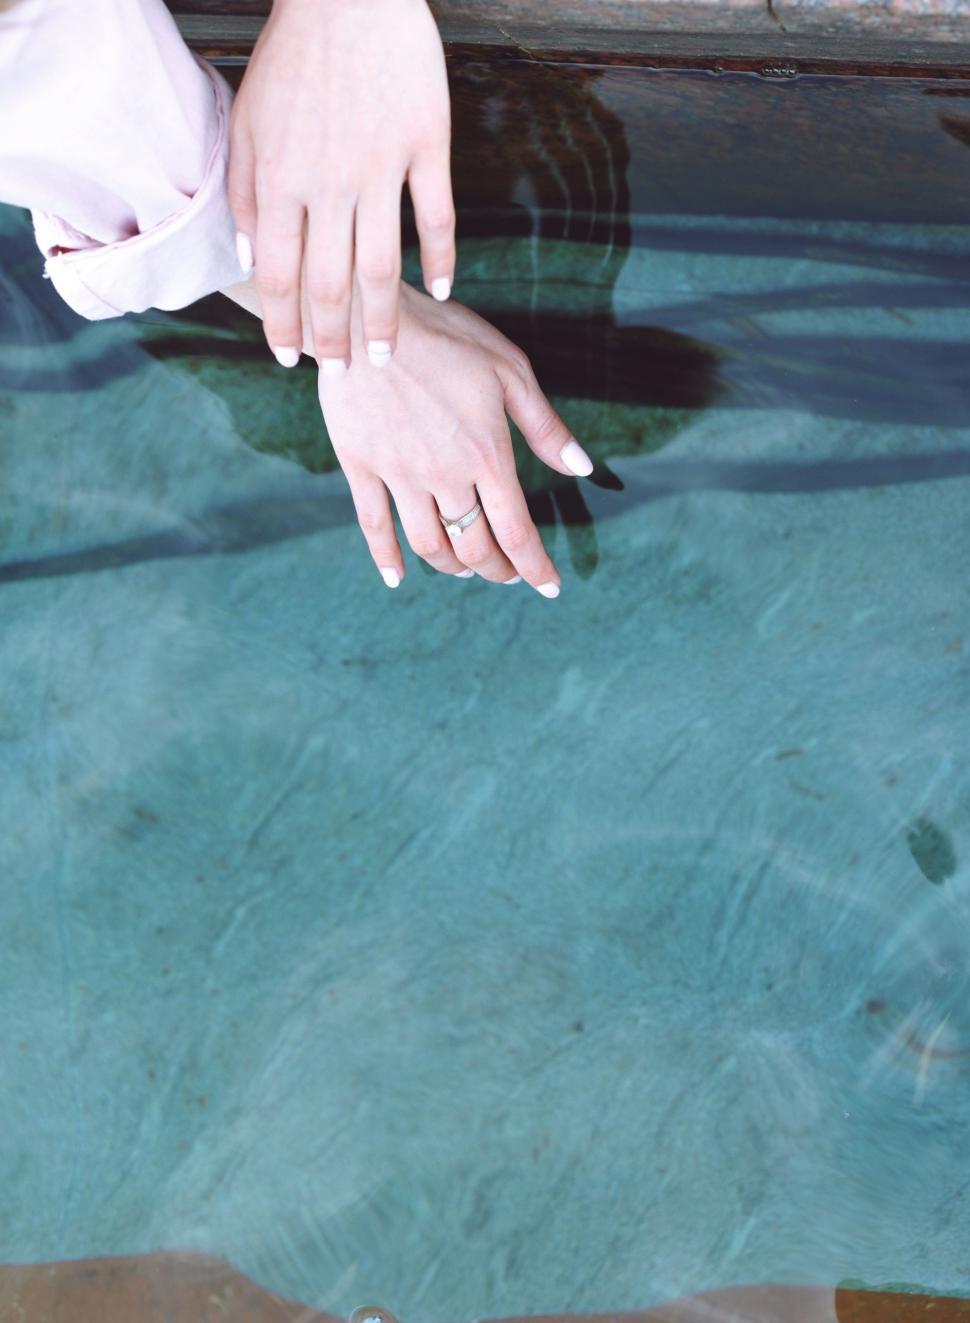 Free Image of Hand Reaching Into Pool of Water 